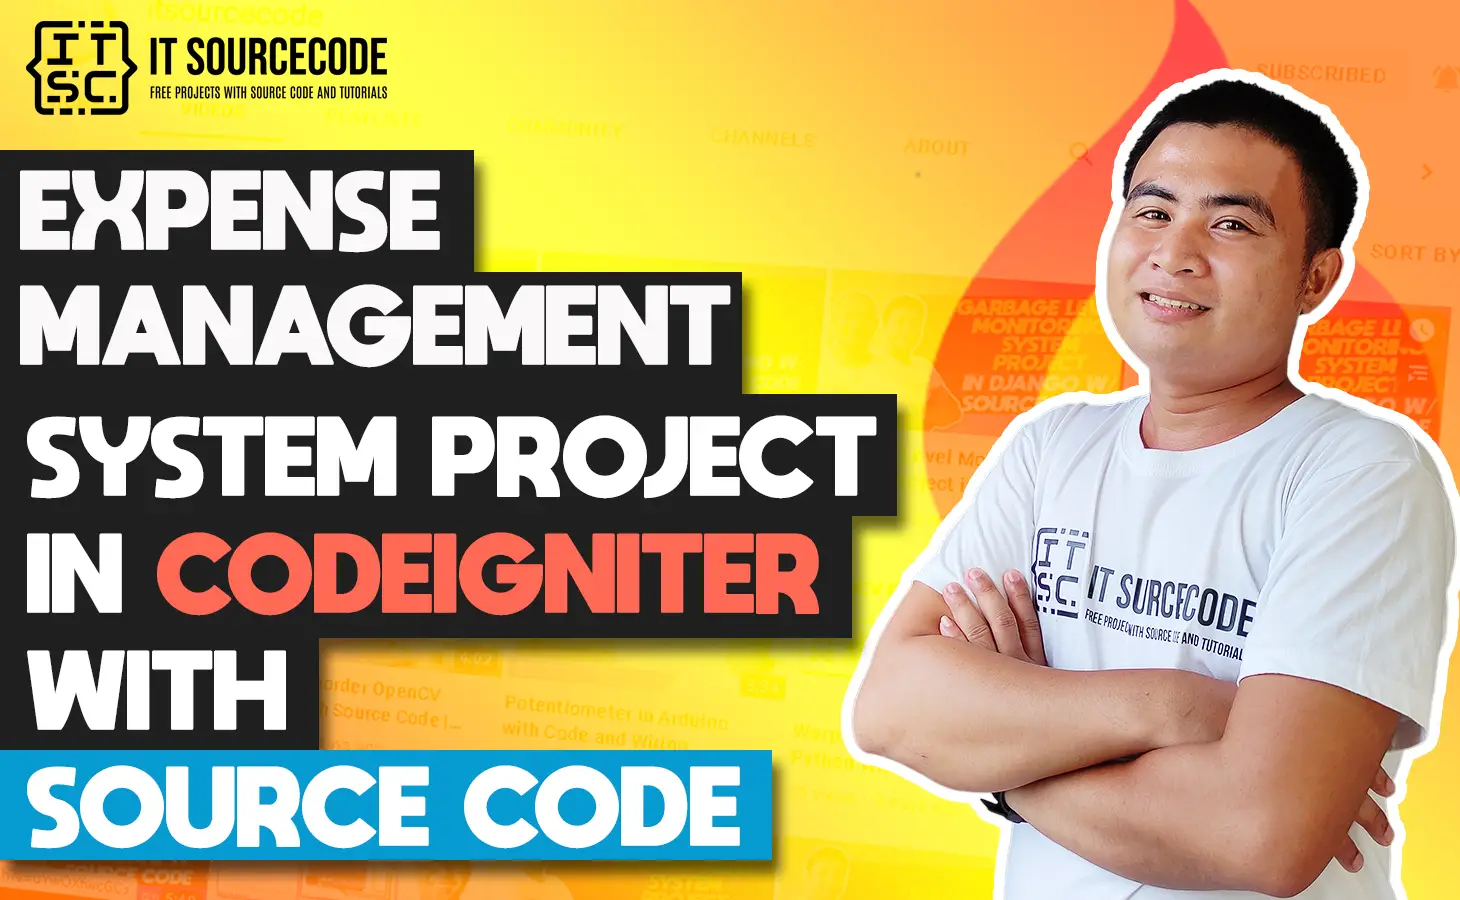 Expense Management System Project In CodeIgniter With Source Code